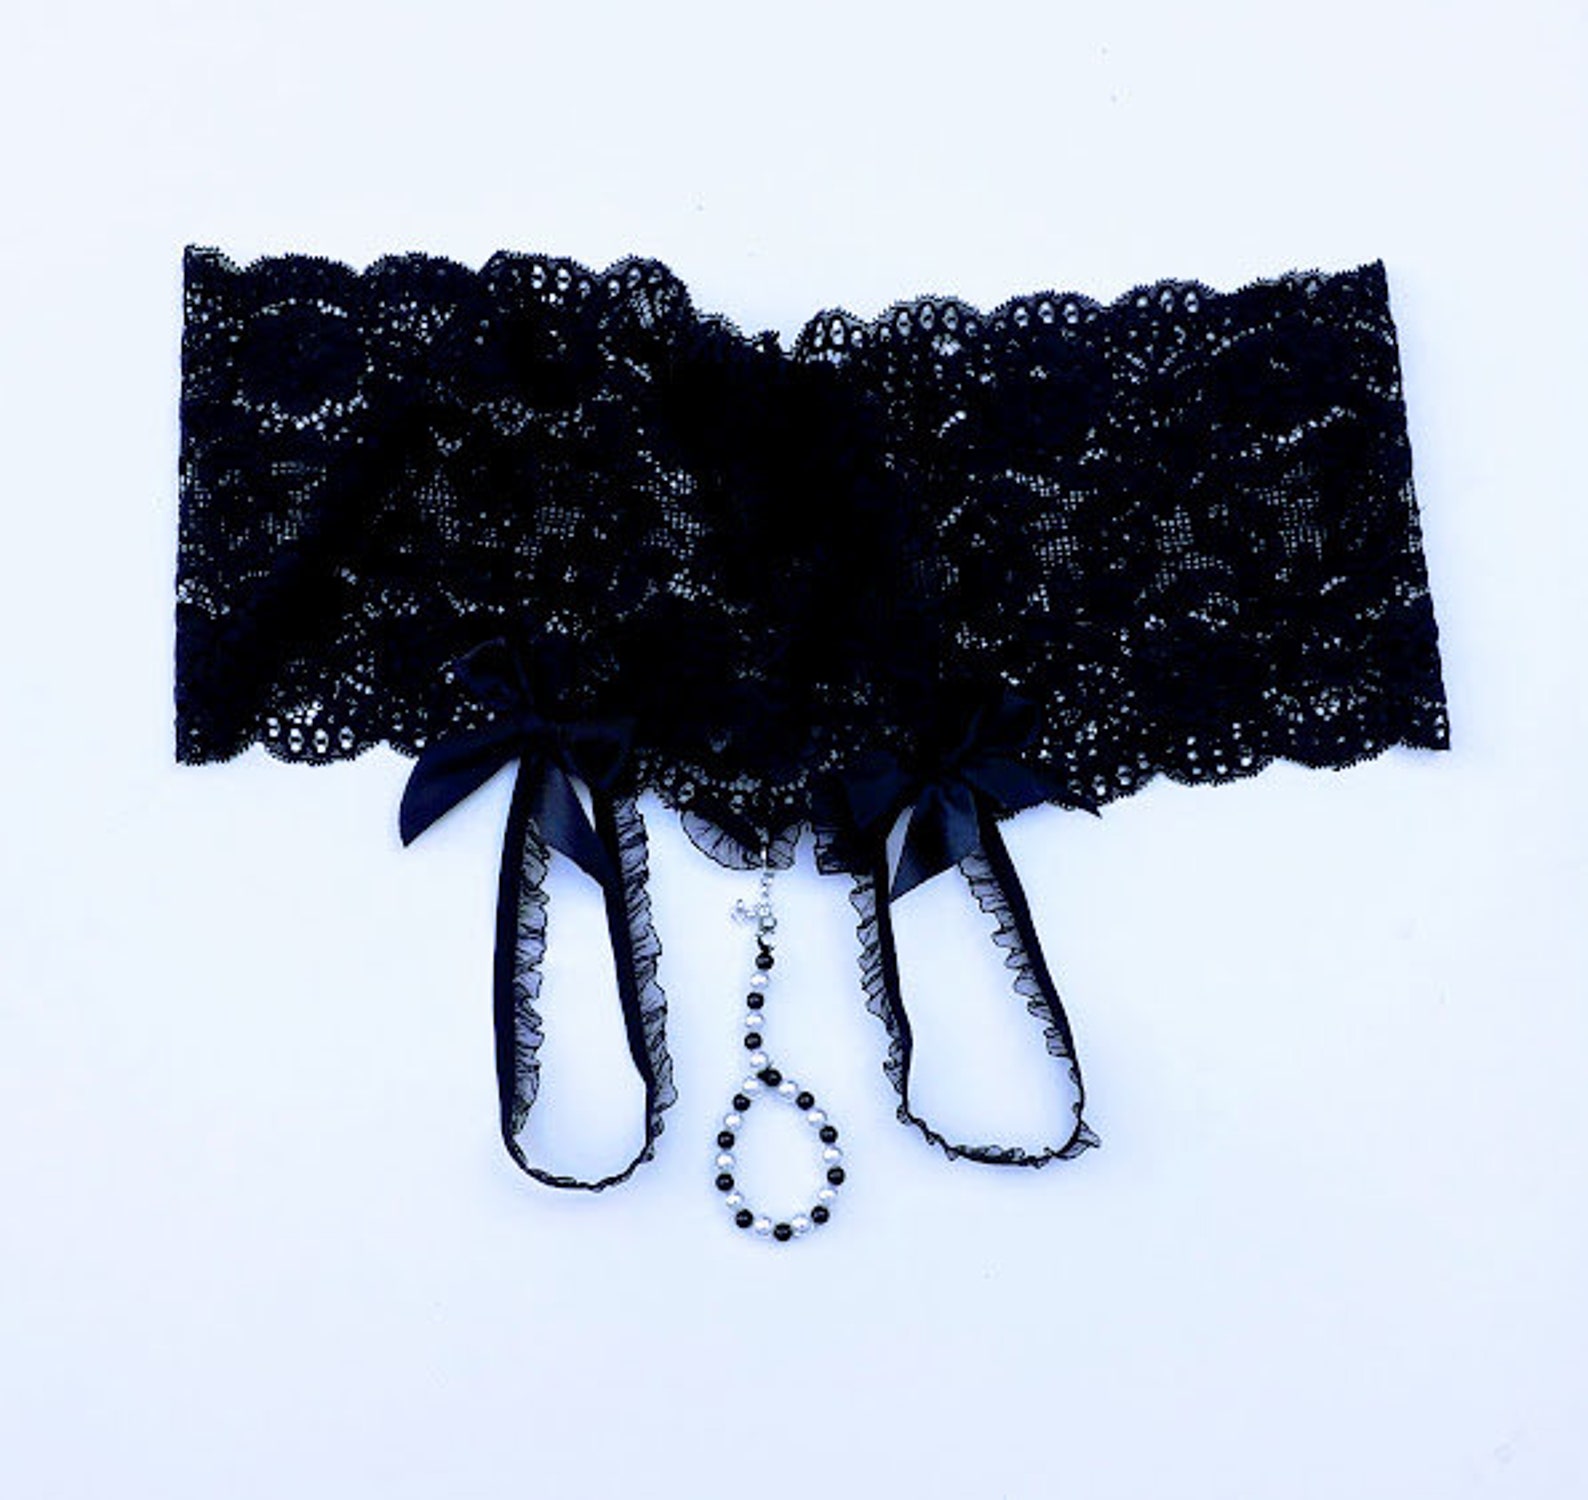 Scrunchy Opening Men Lace Lingerie Open Crotch Thong G-string - Etsy